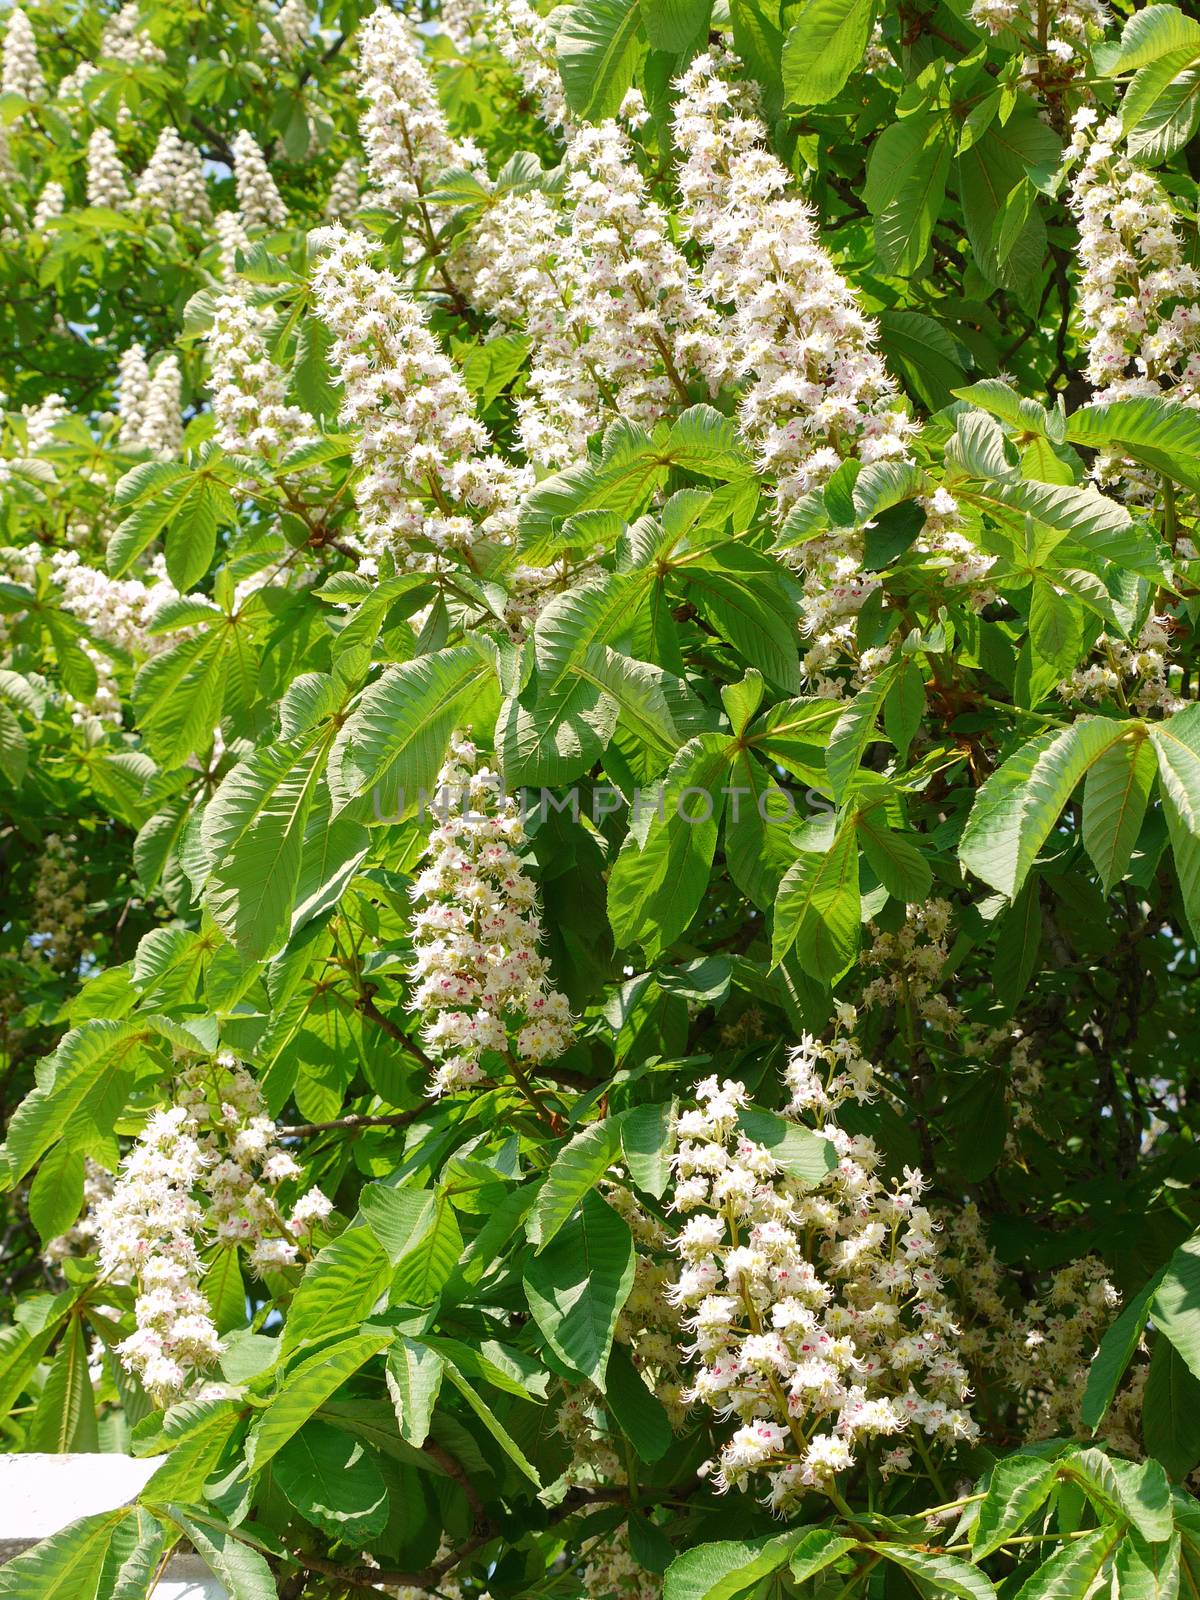 amazing white candles of blossoming chestnuts are very beautiful